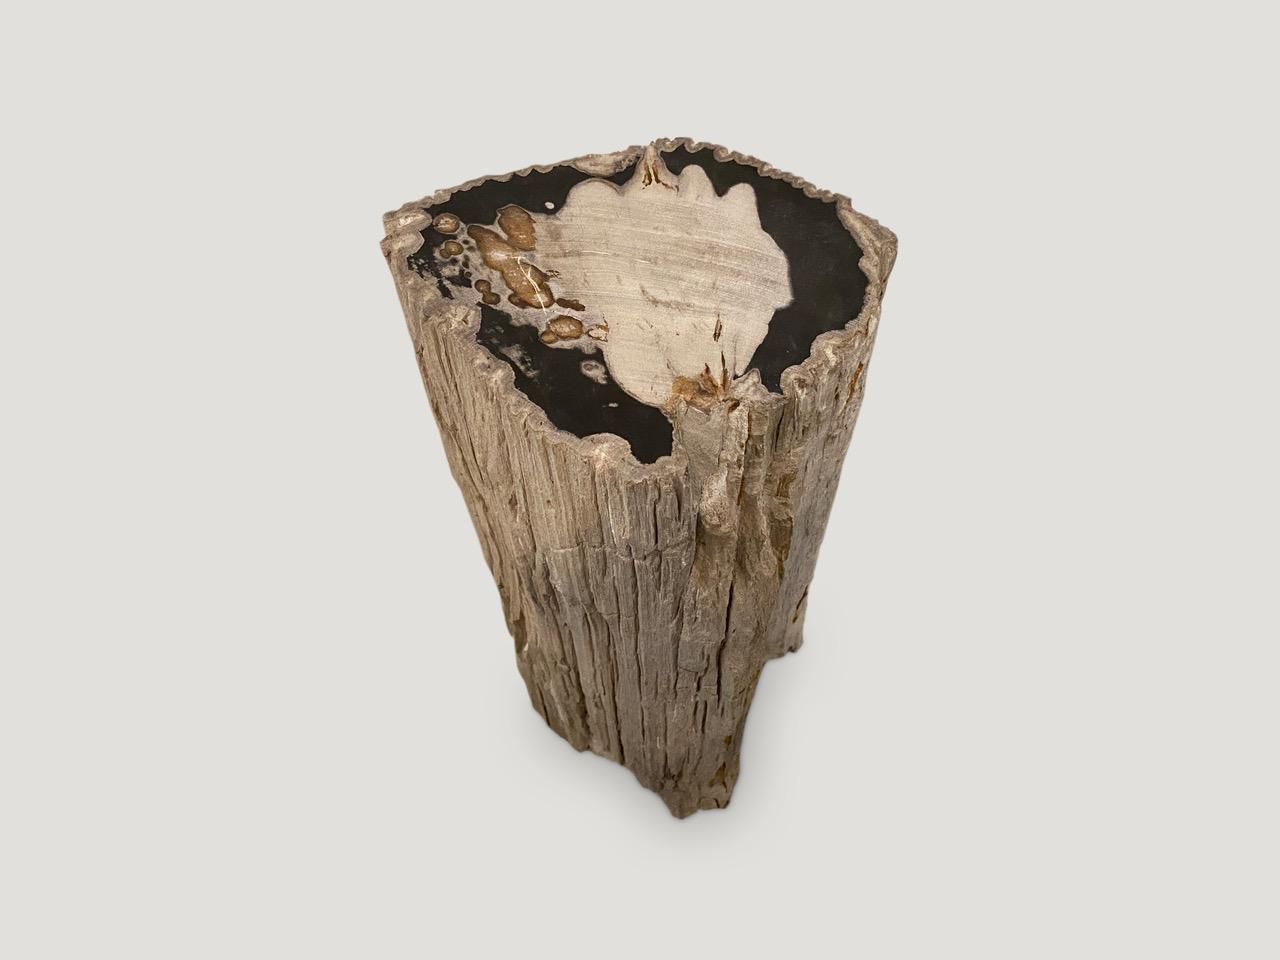 Impressive oversized high quality petrified wood side table with dramatic contrasting tones. It’s fascinating how Mother Nature produces these exquisite 40 million year old petrified teak logs with such contrasting colors with natural patterns